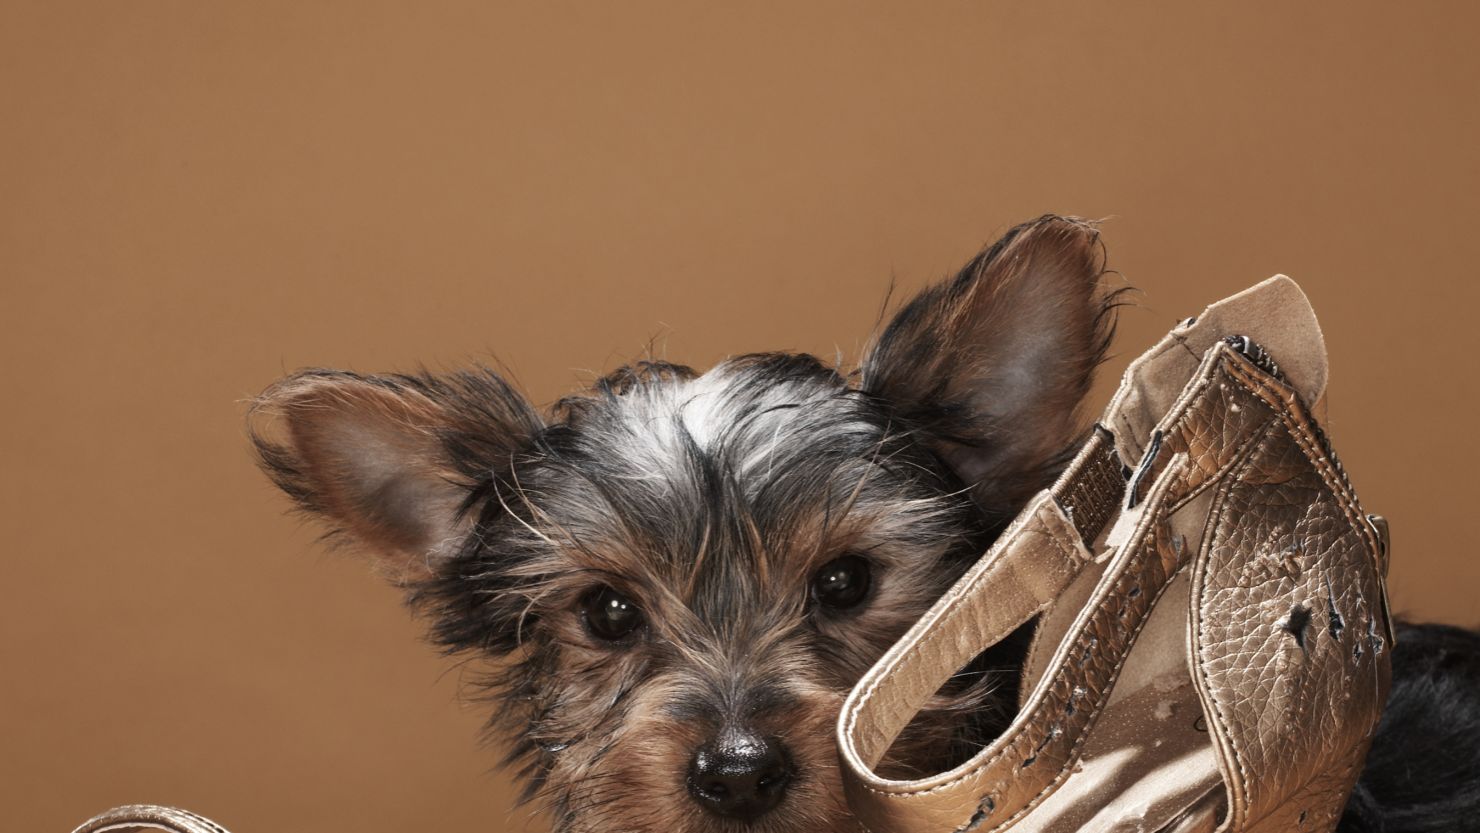 Keep your dog away from your shoes if they're prone to chewing on them.